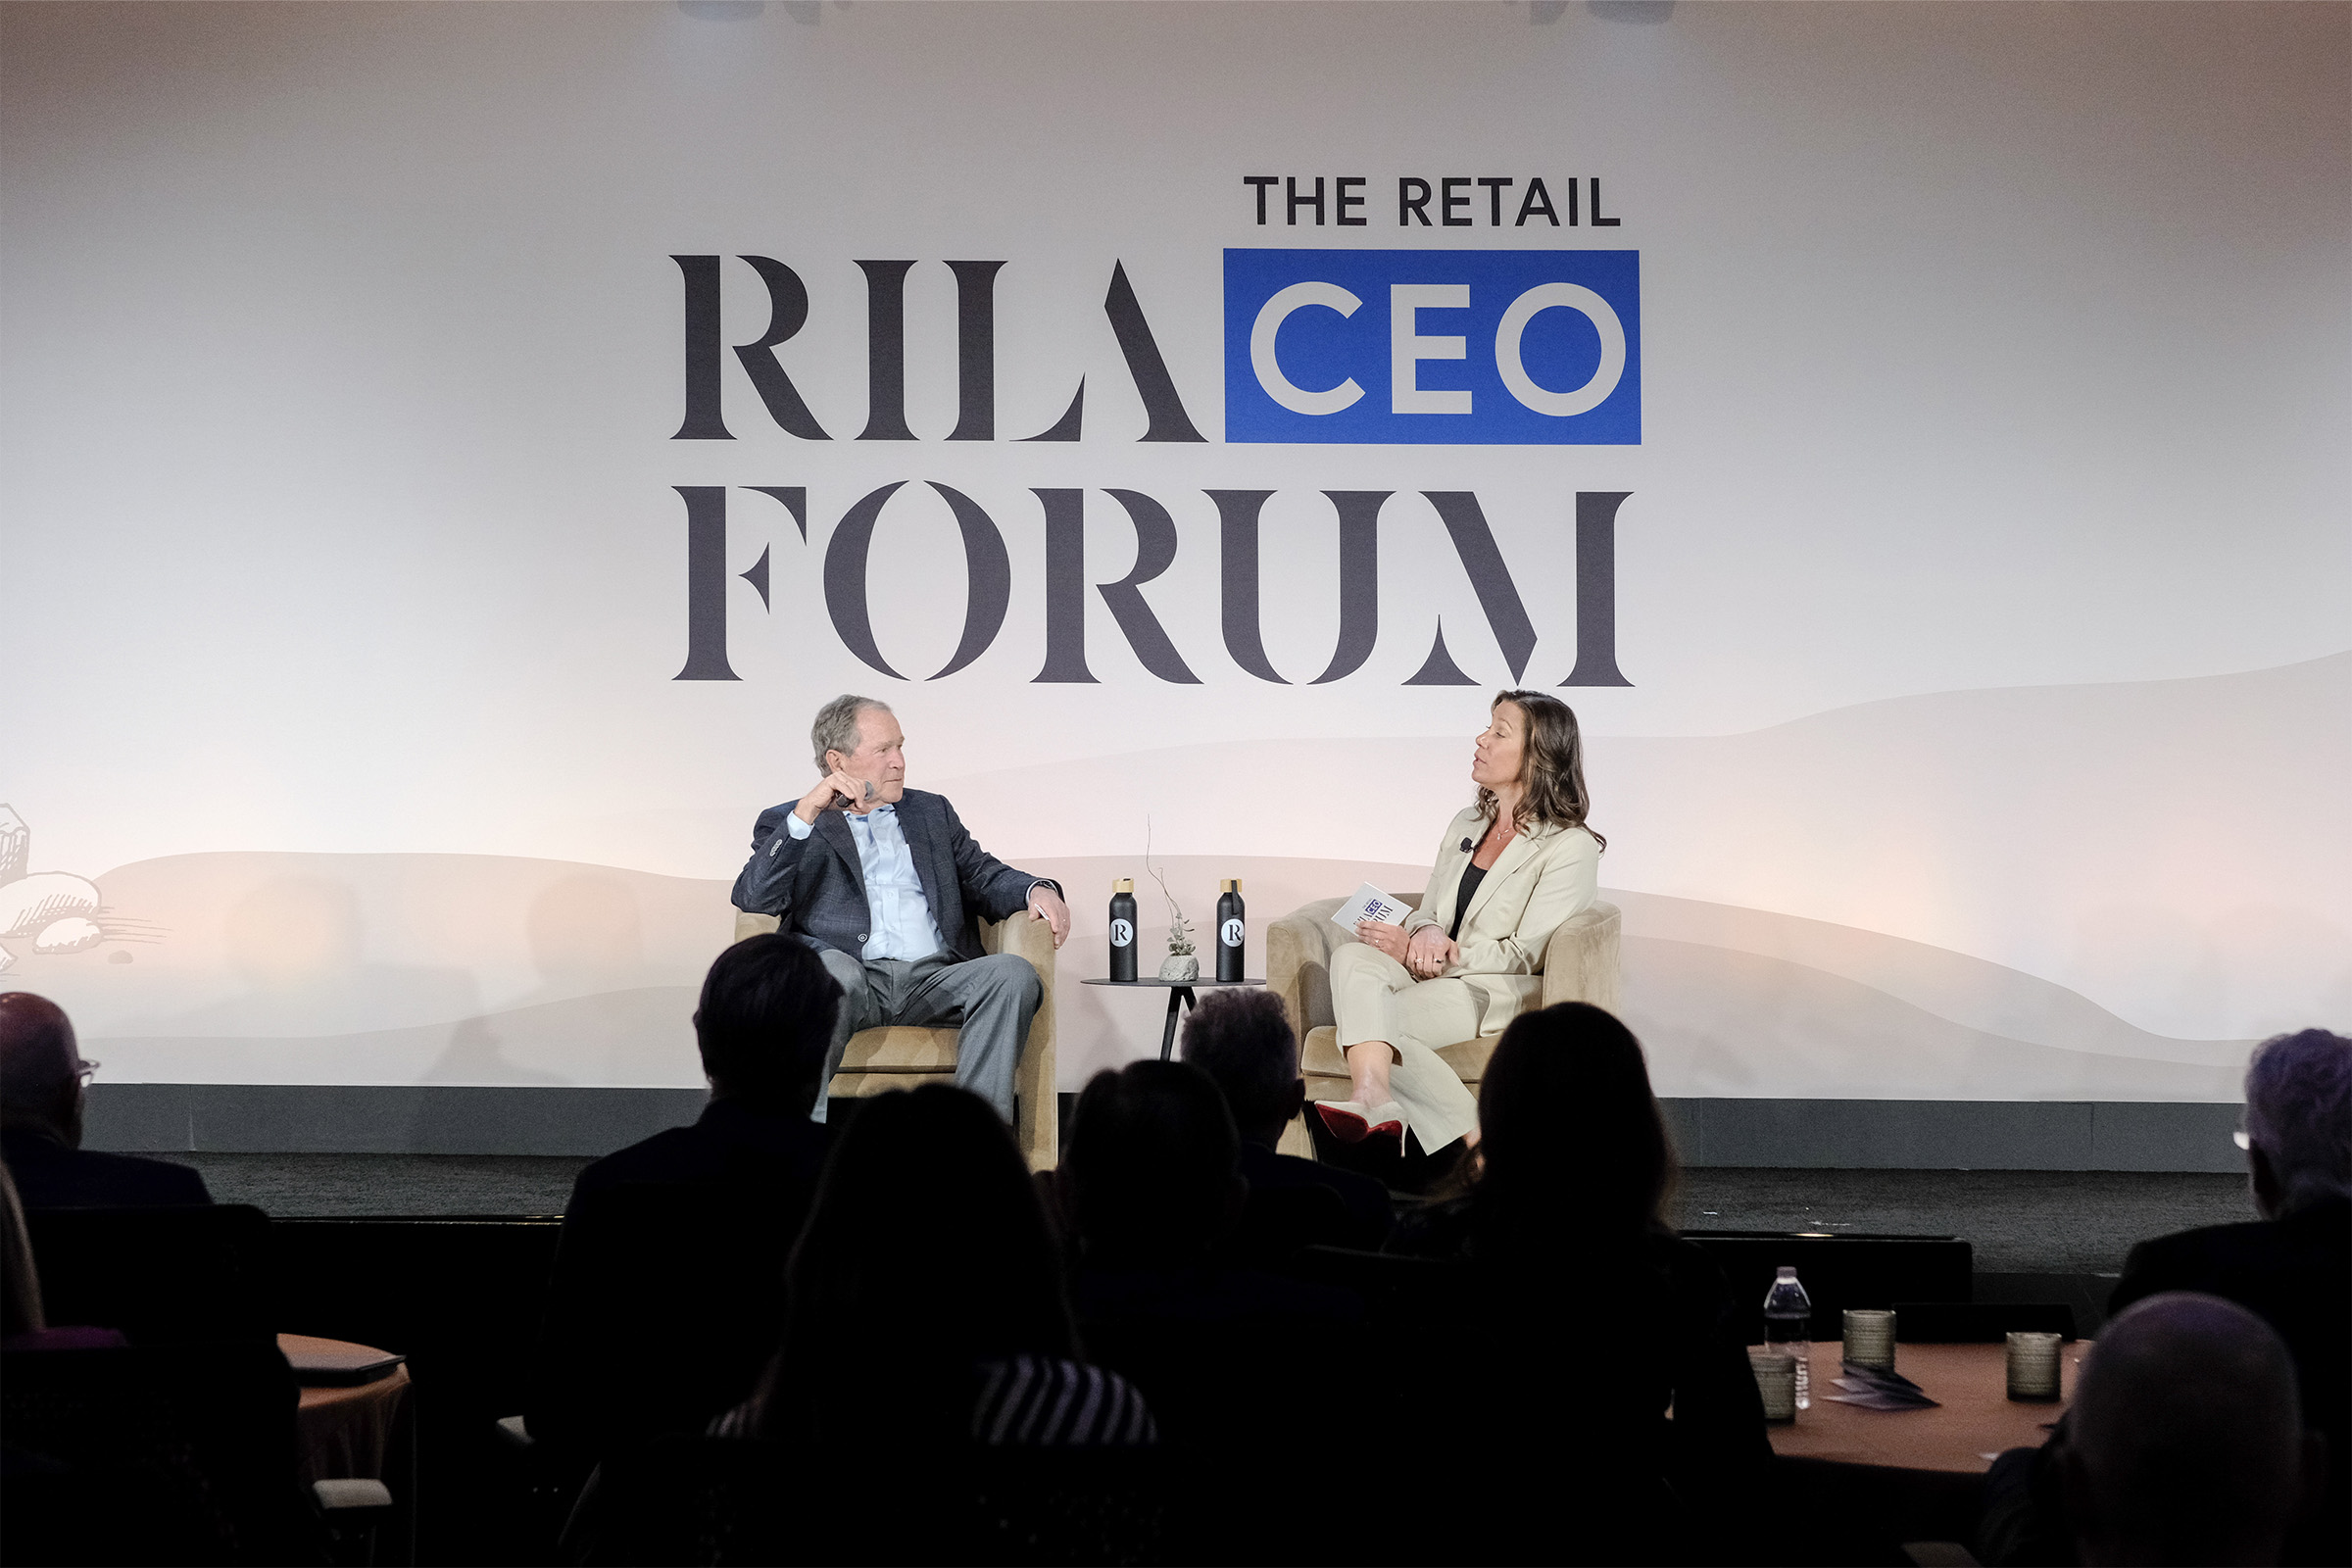 Retail CEO Forum with George Bush